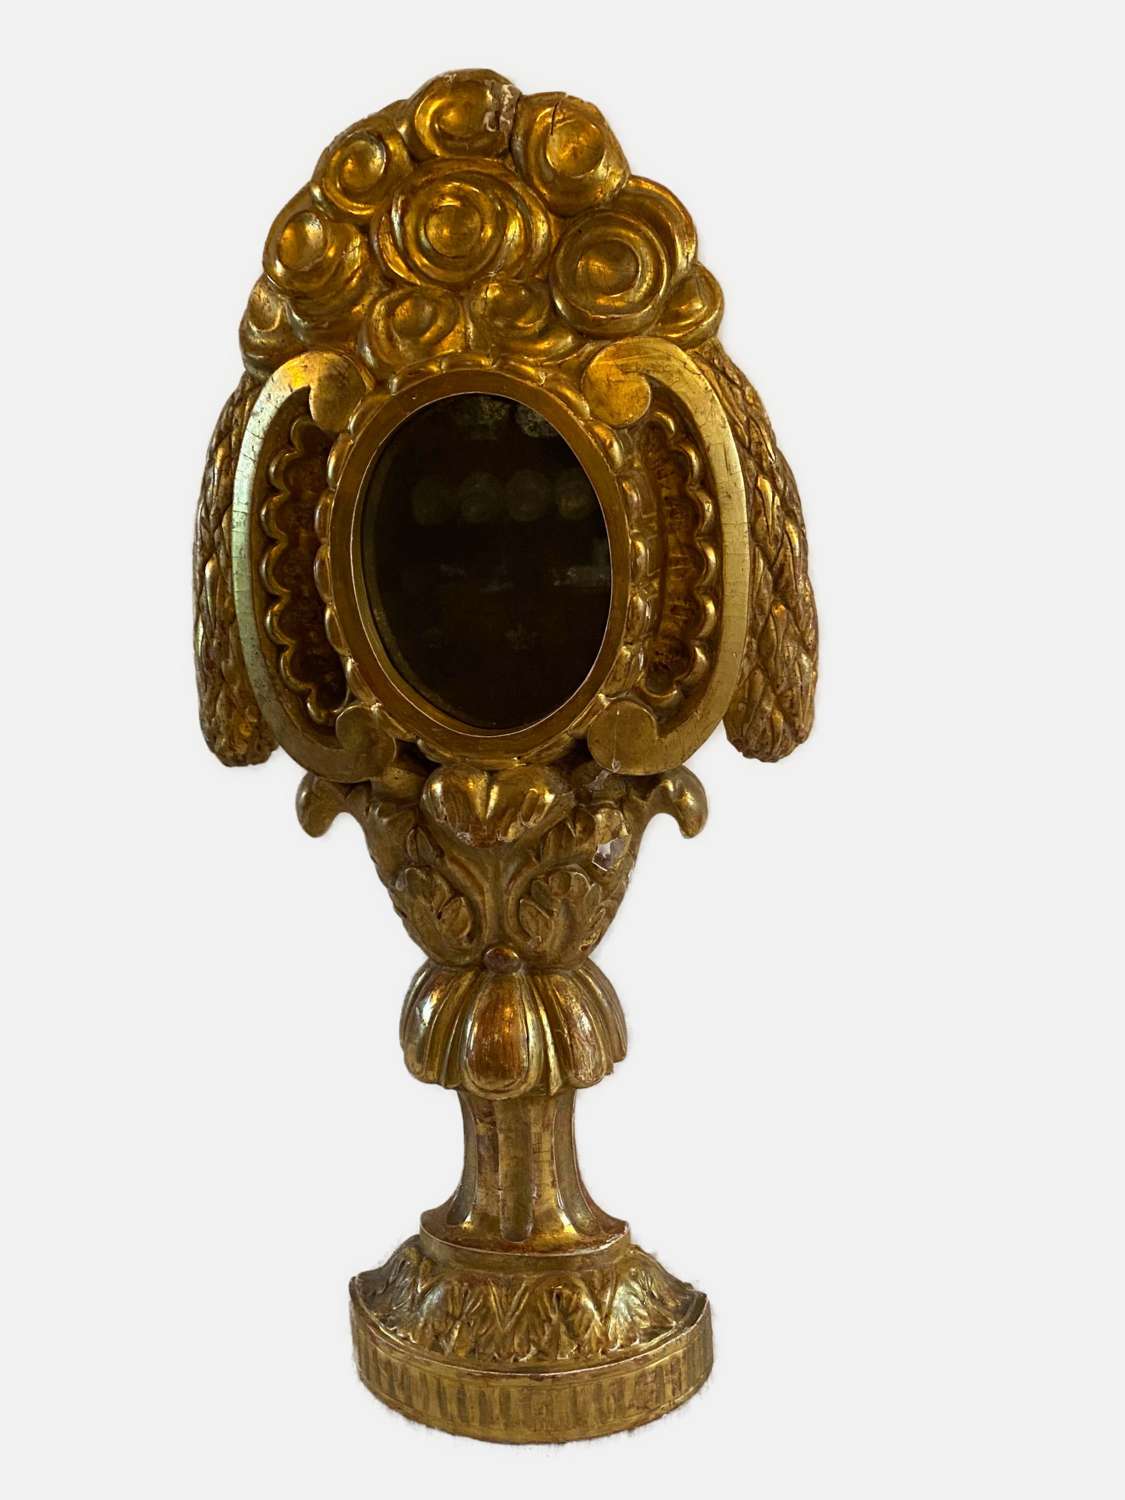 A large mirrored Reliquary In the form of a classical urn